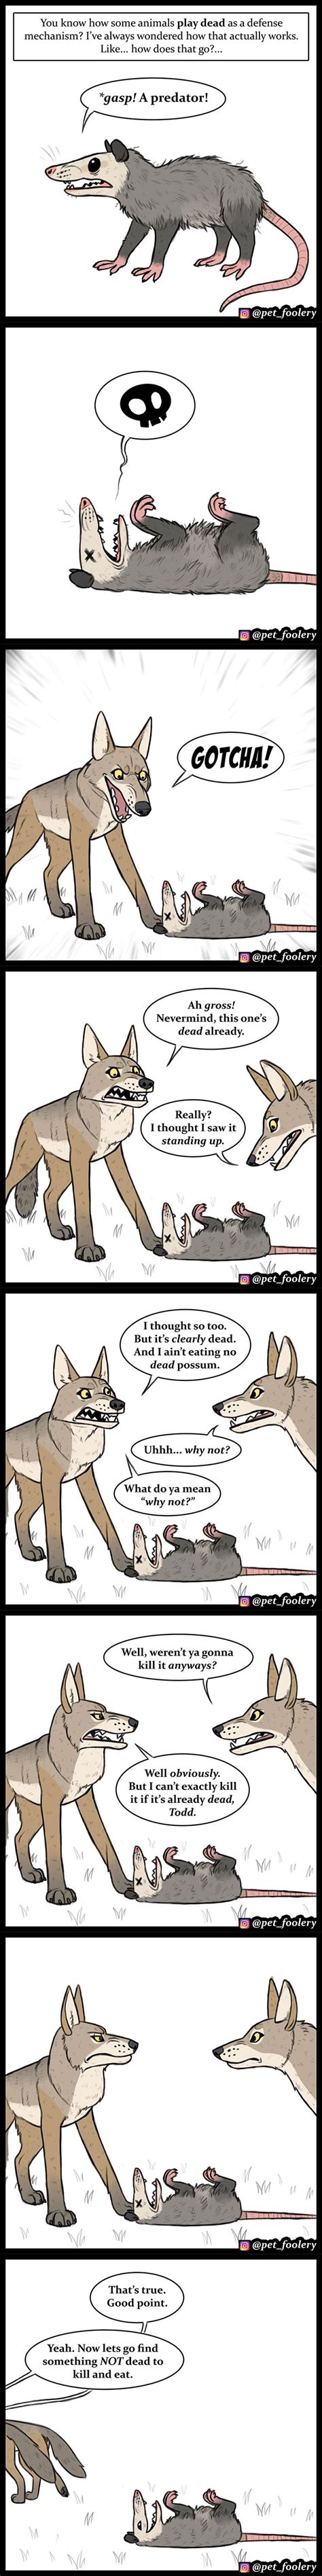 30 Funny Comics About Animals By Pet Foolery Delaram Art And Design